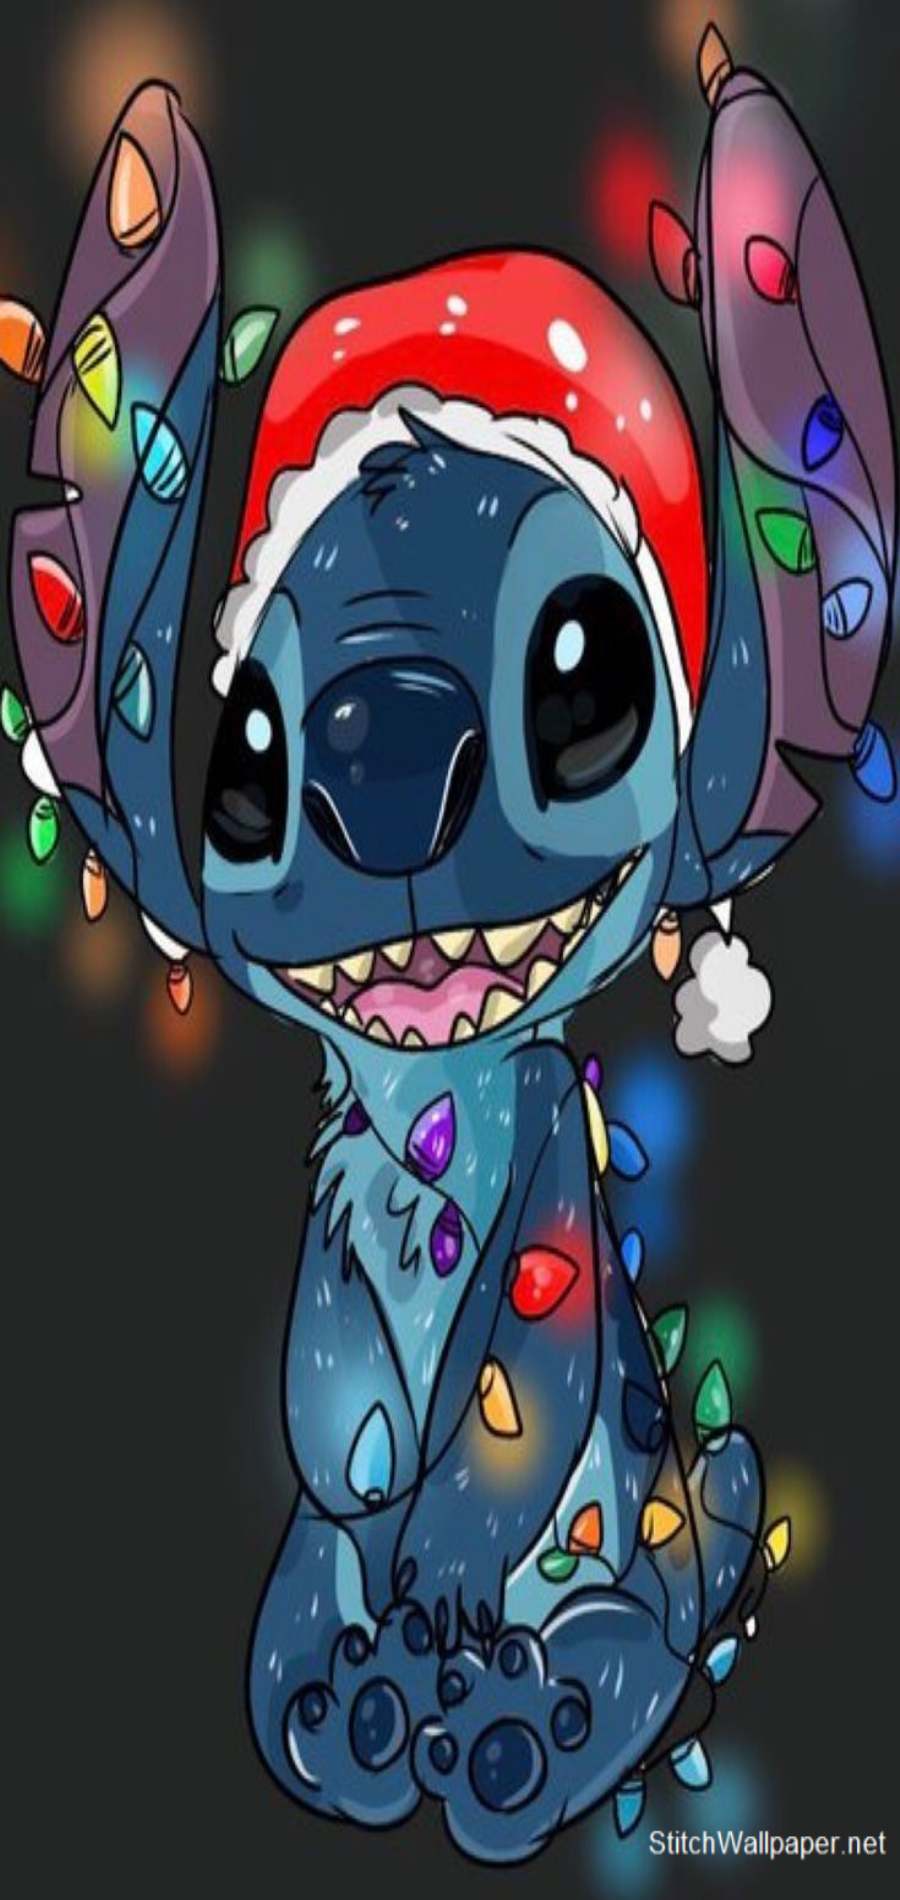 stitch live wallpaper for iphone